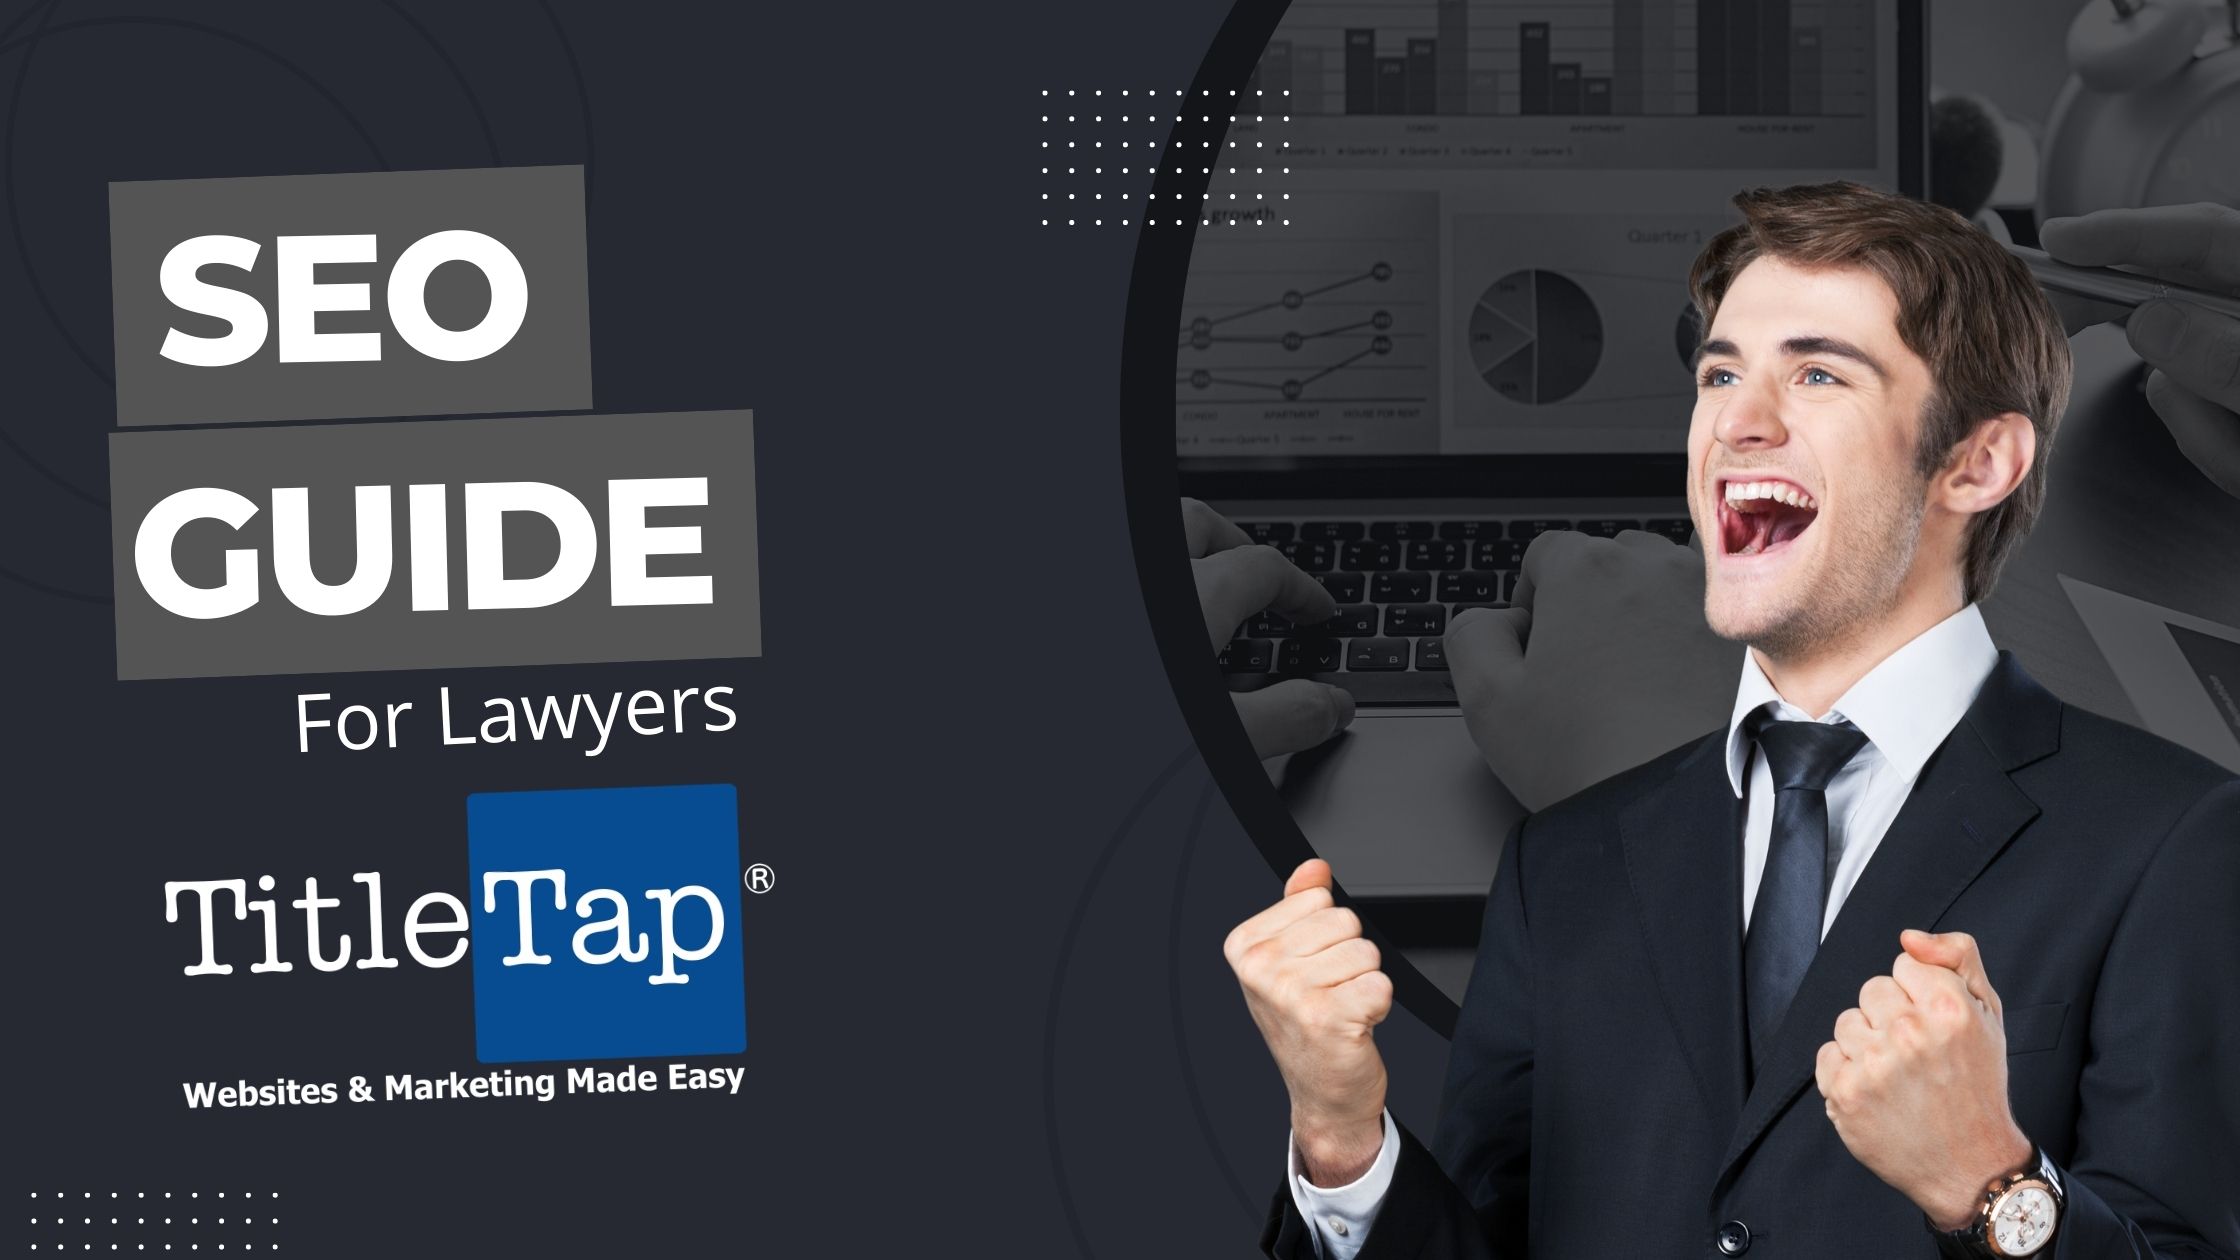 The 80/20 guide to SEO for lawyers